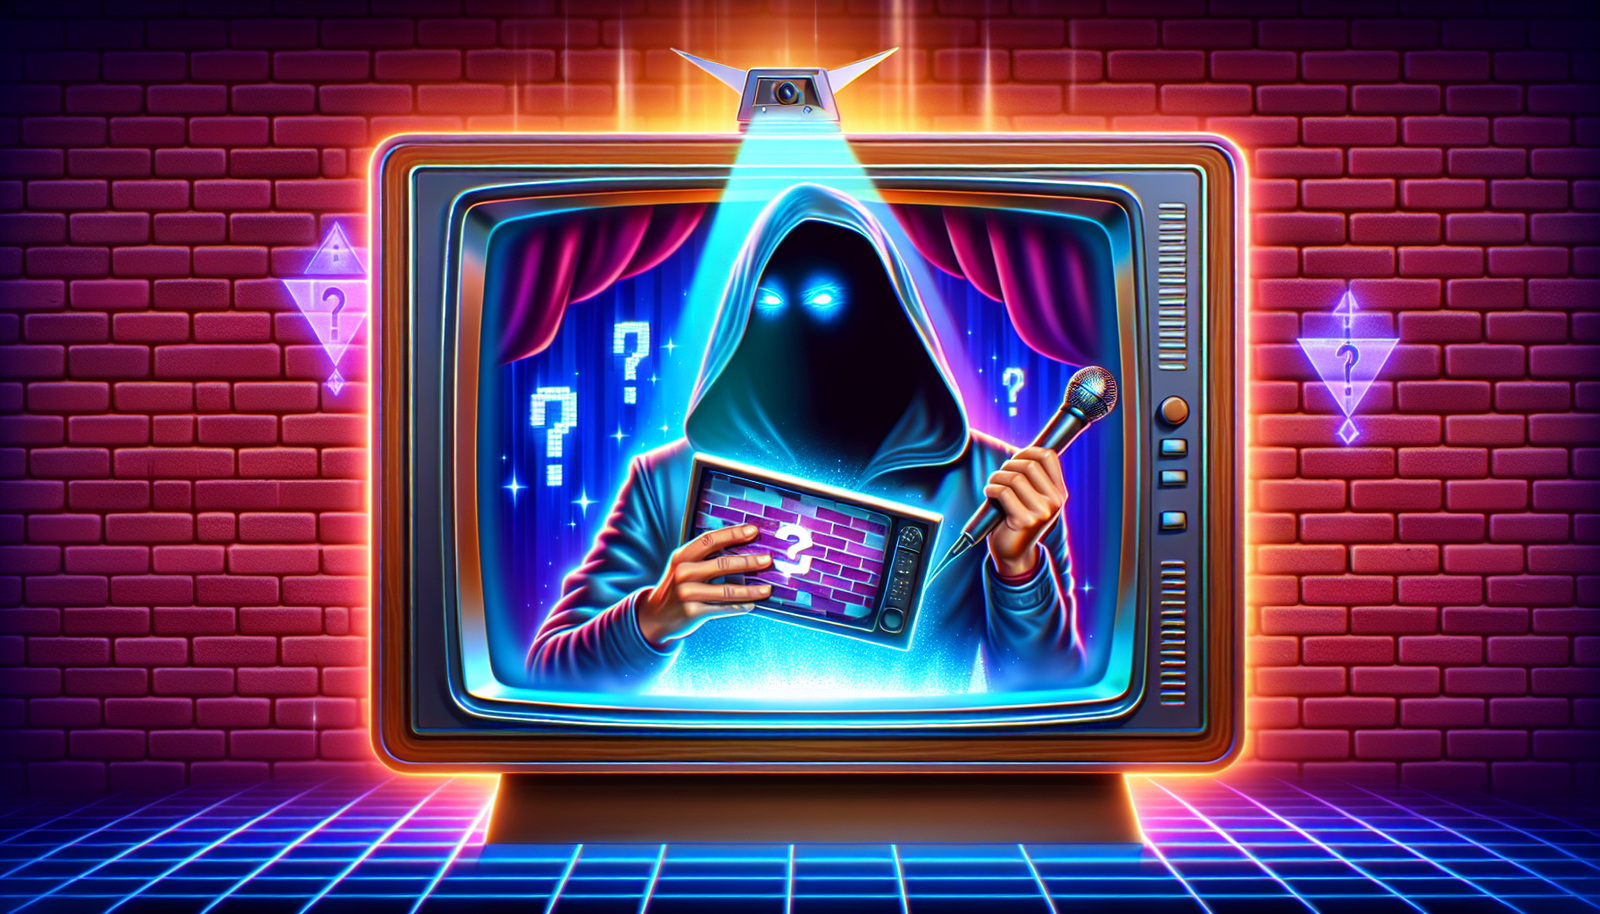 do you have what it takes to unravel the million dollar secret in netflix's upcoming game show? test your skills and see if you can guess the hidden mystery that could lead to a fortune.